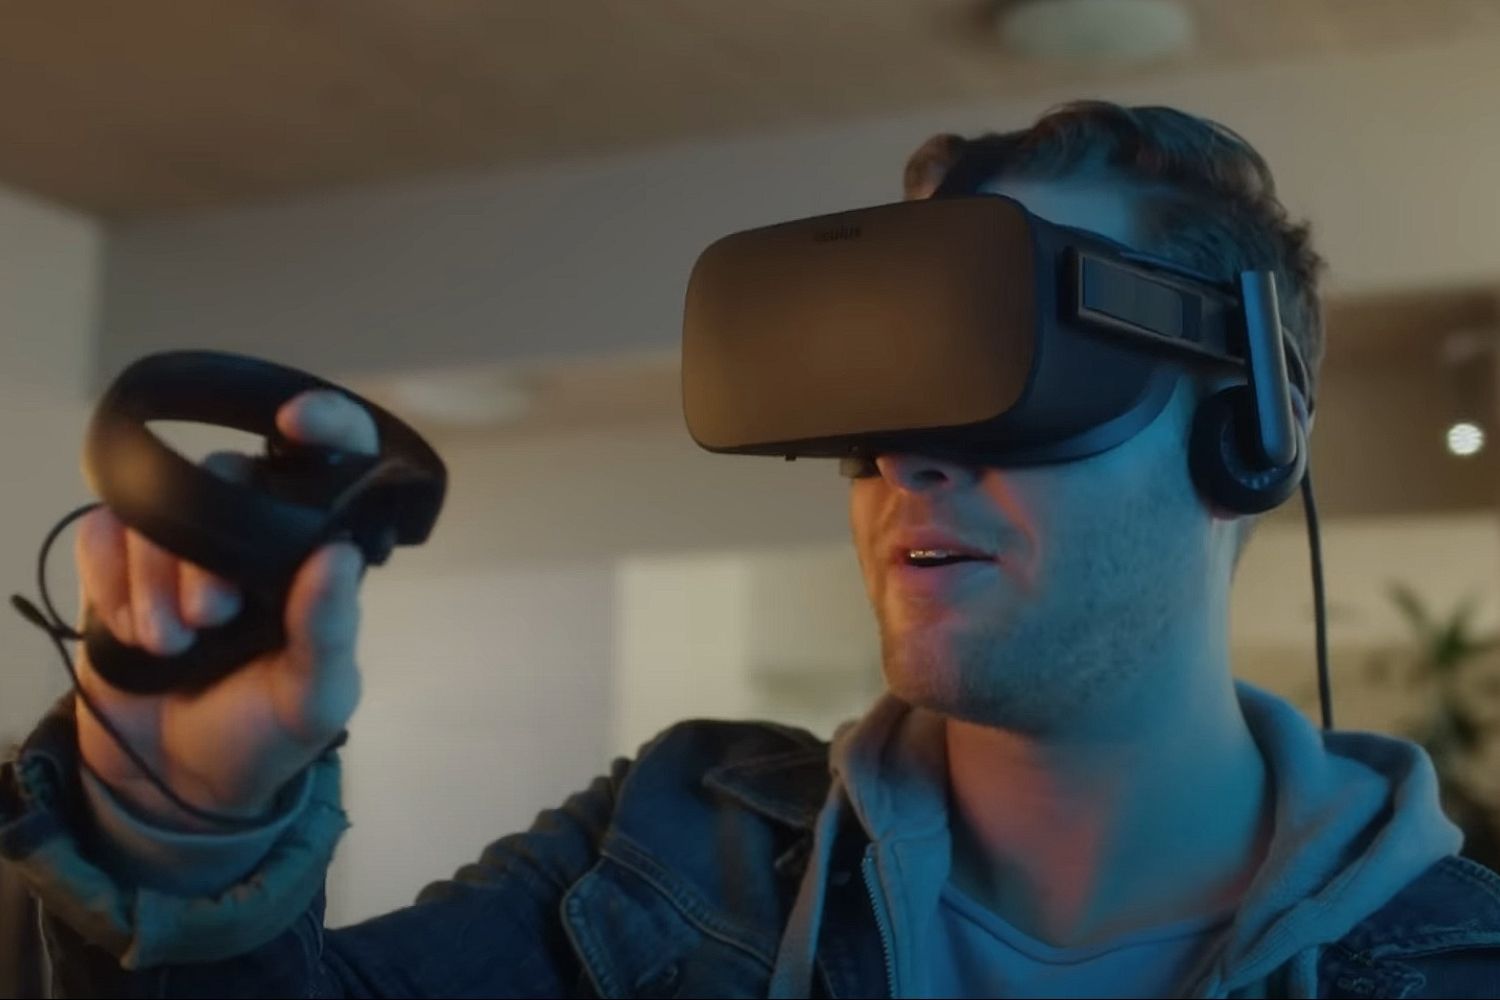 A person using the Oculus Rift CV1 headset and Oculus Touch controllers